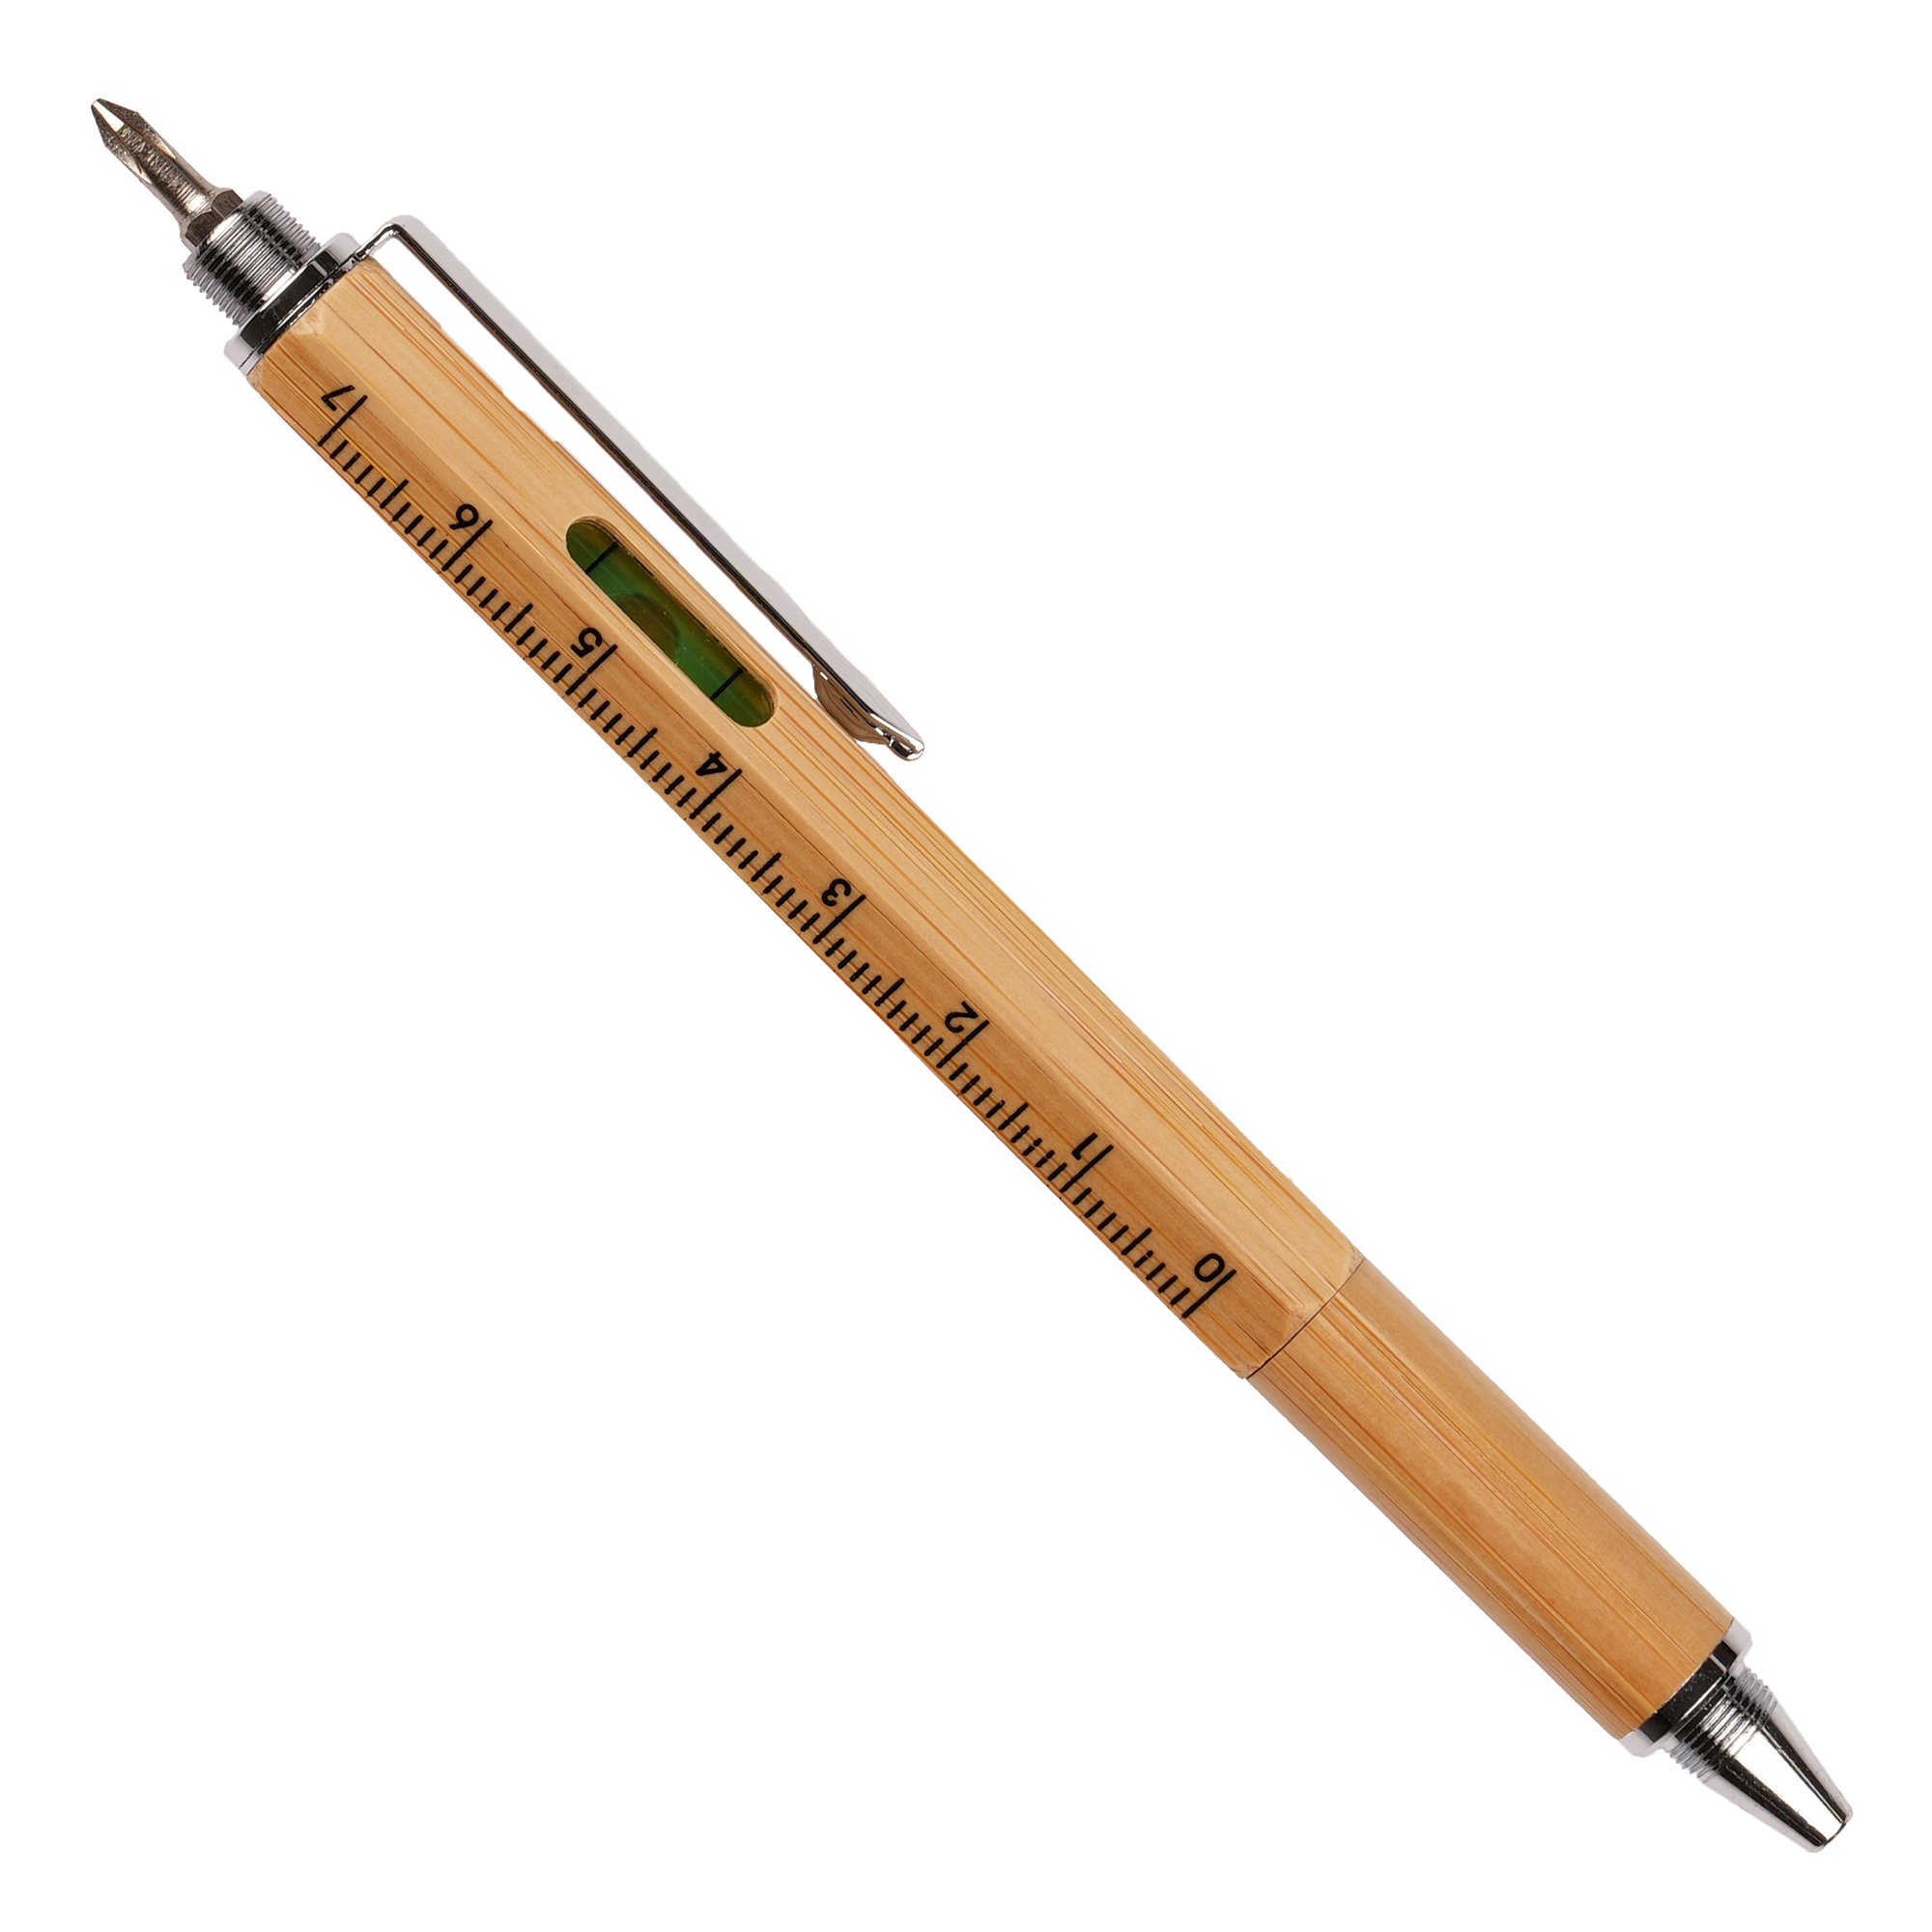 Systemo Bamboo 6-in-1 Ball Pen